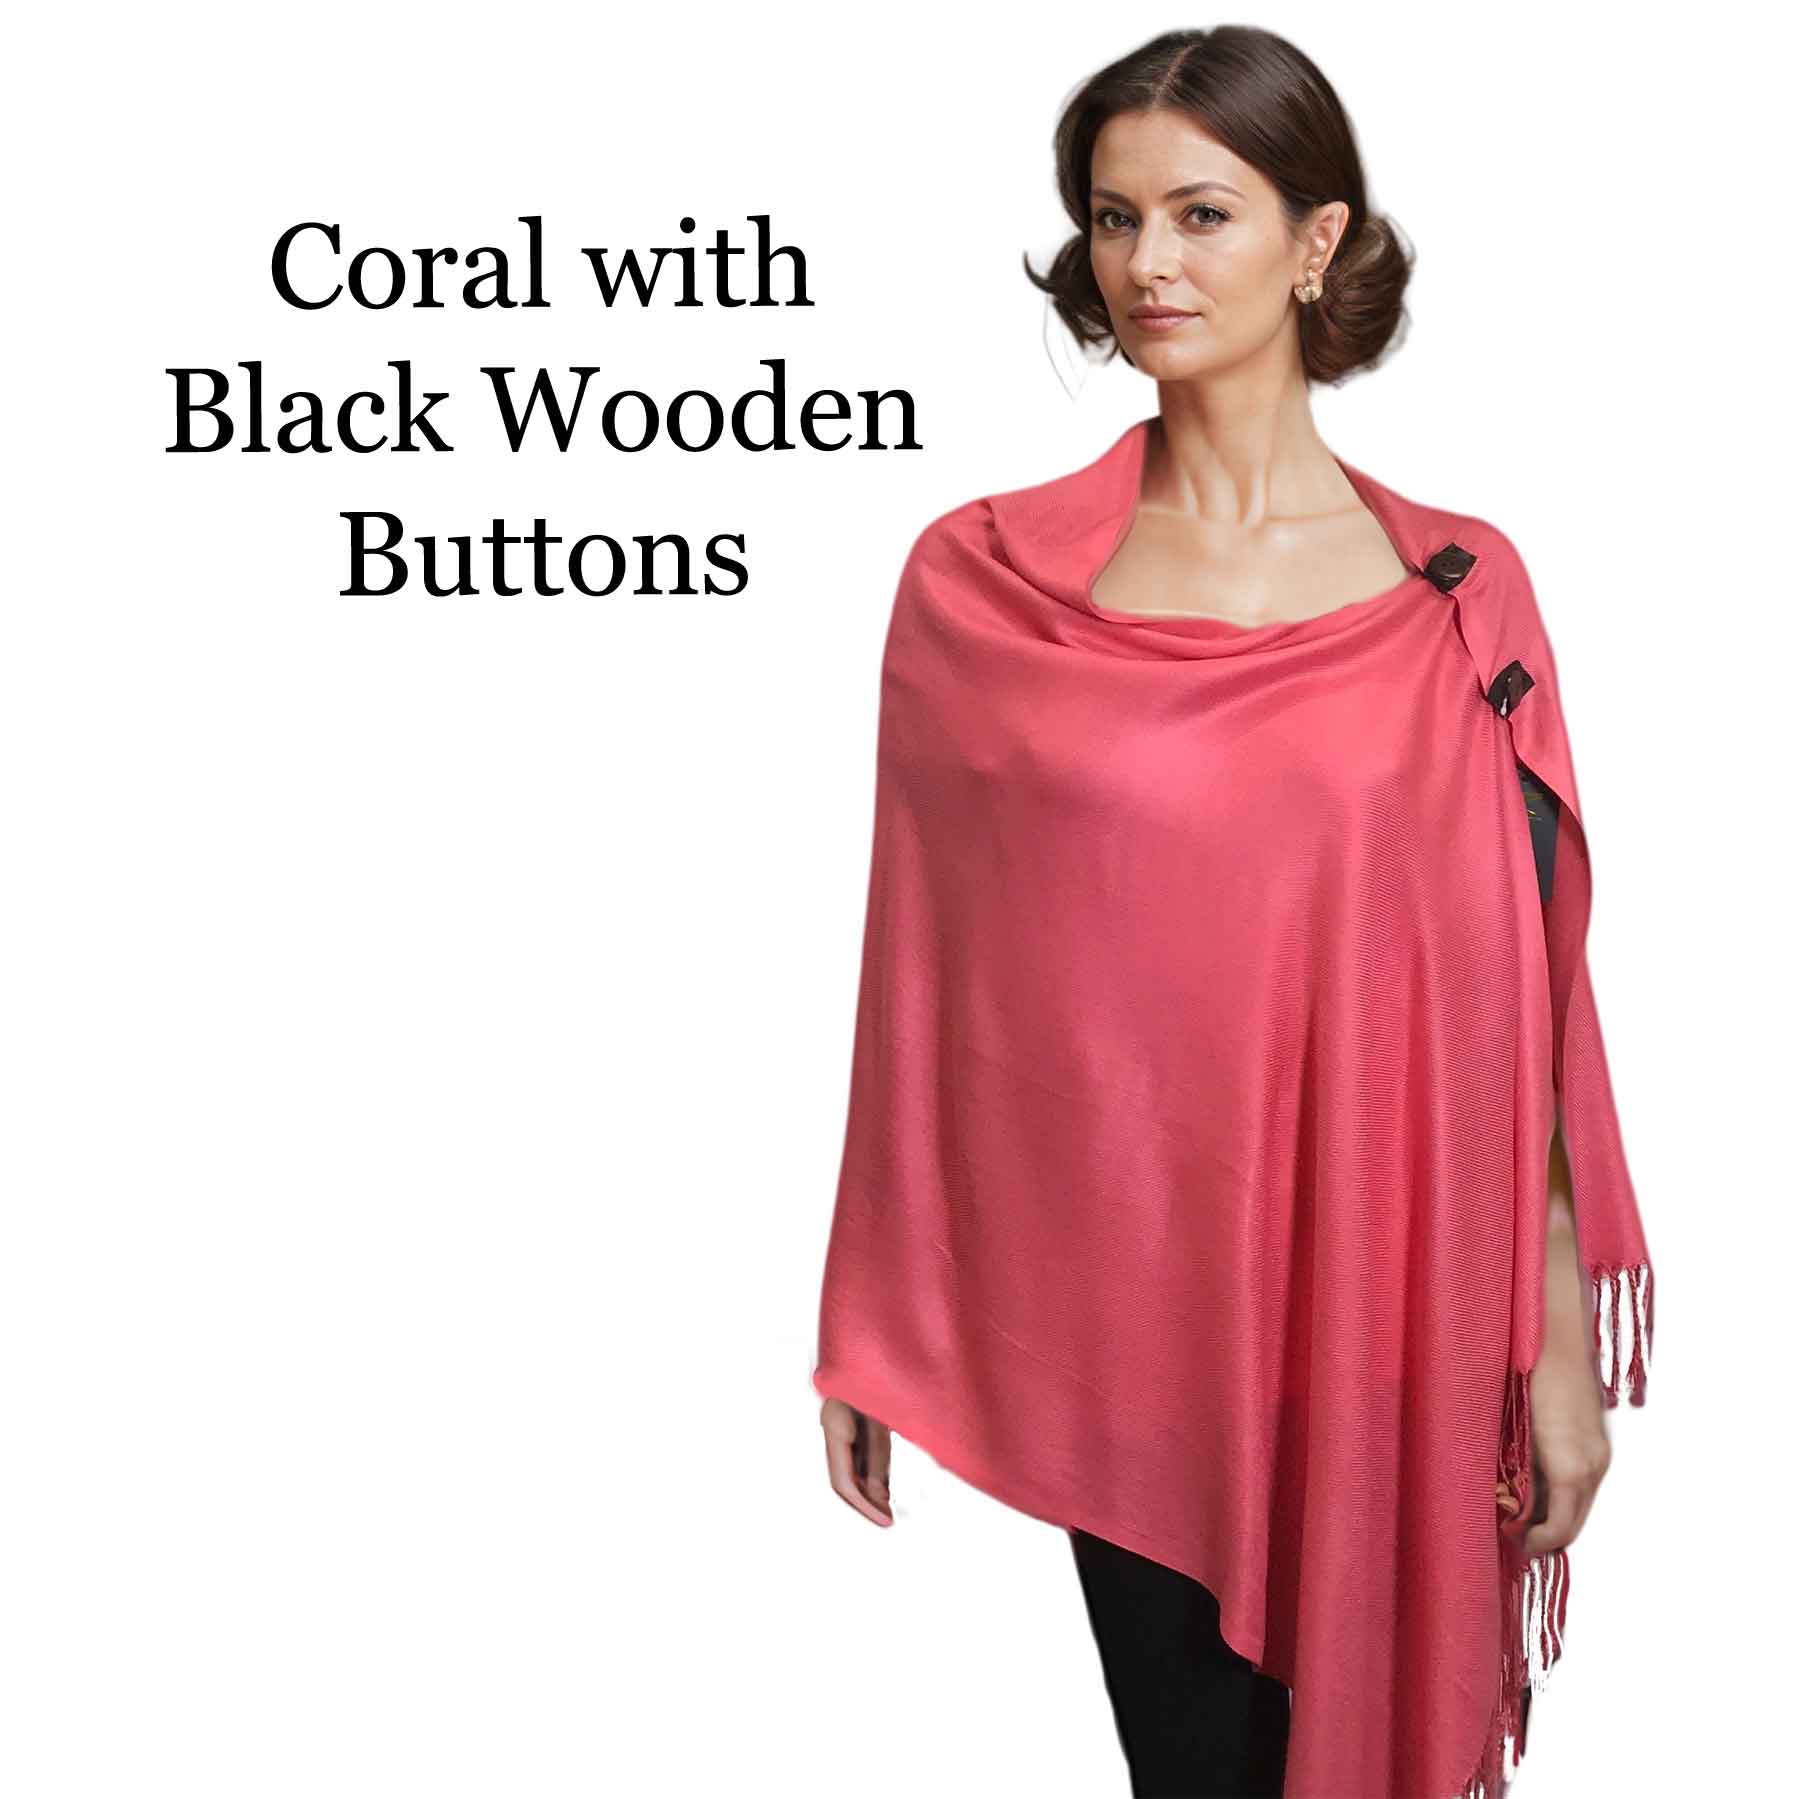 Solid Coral<br>
Pashmina Style Button Shawl